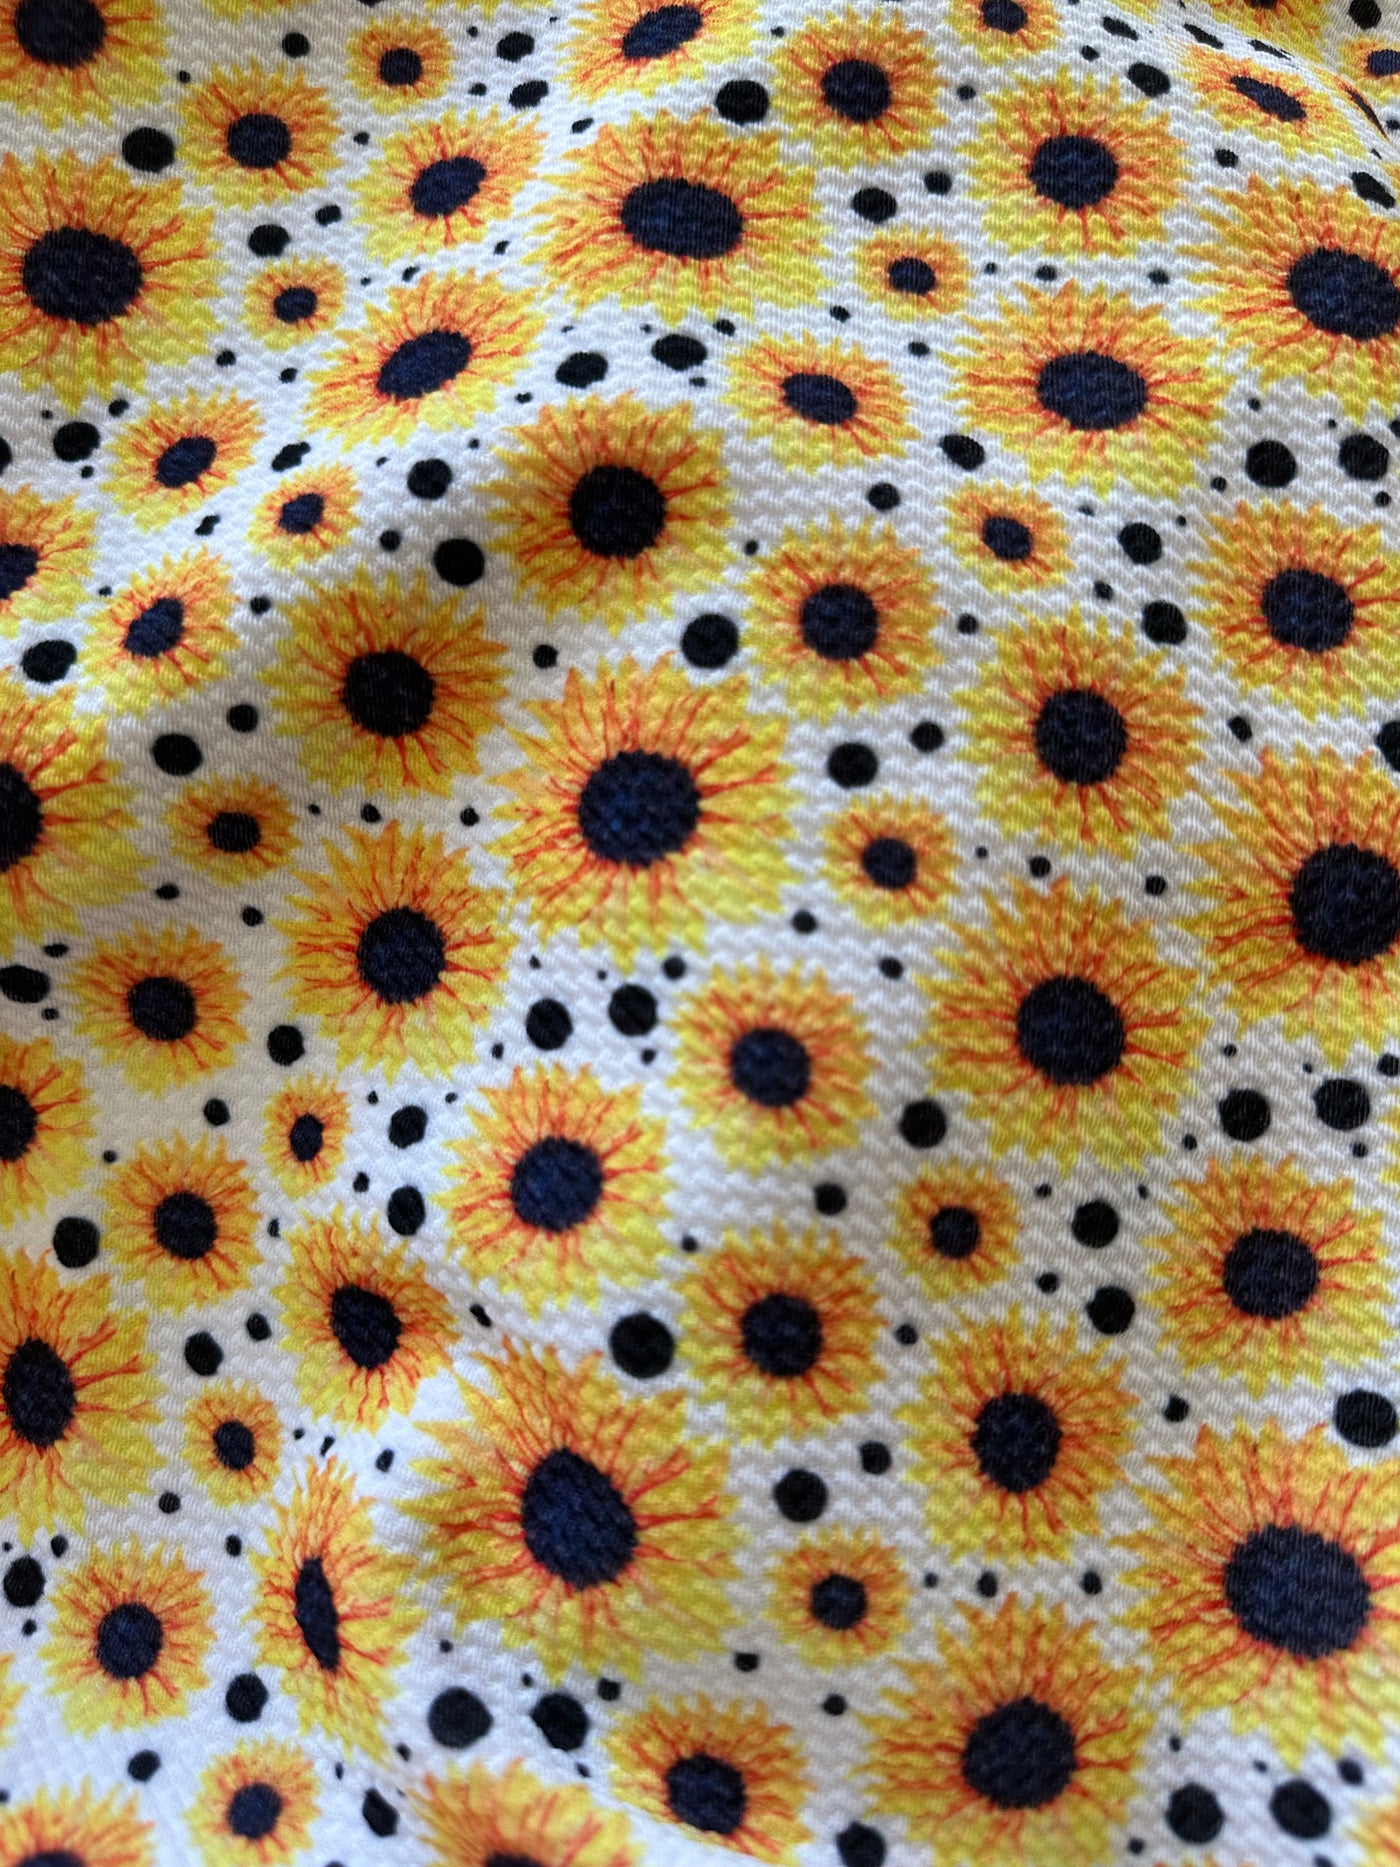 Dotted Sunflowers